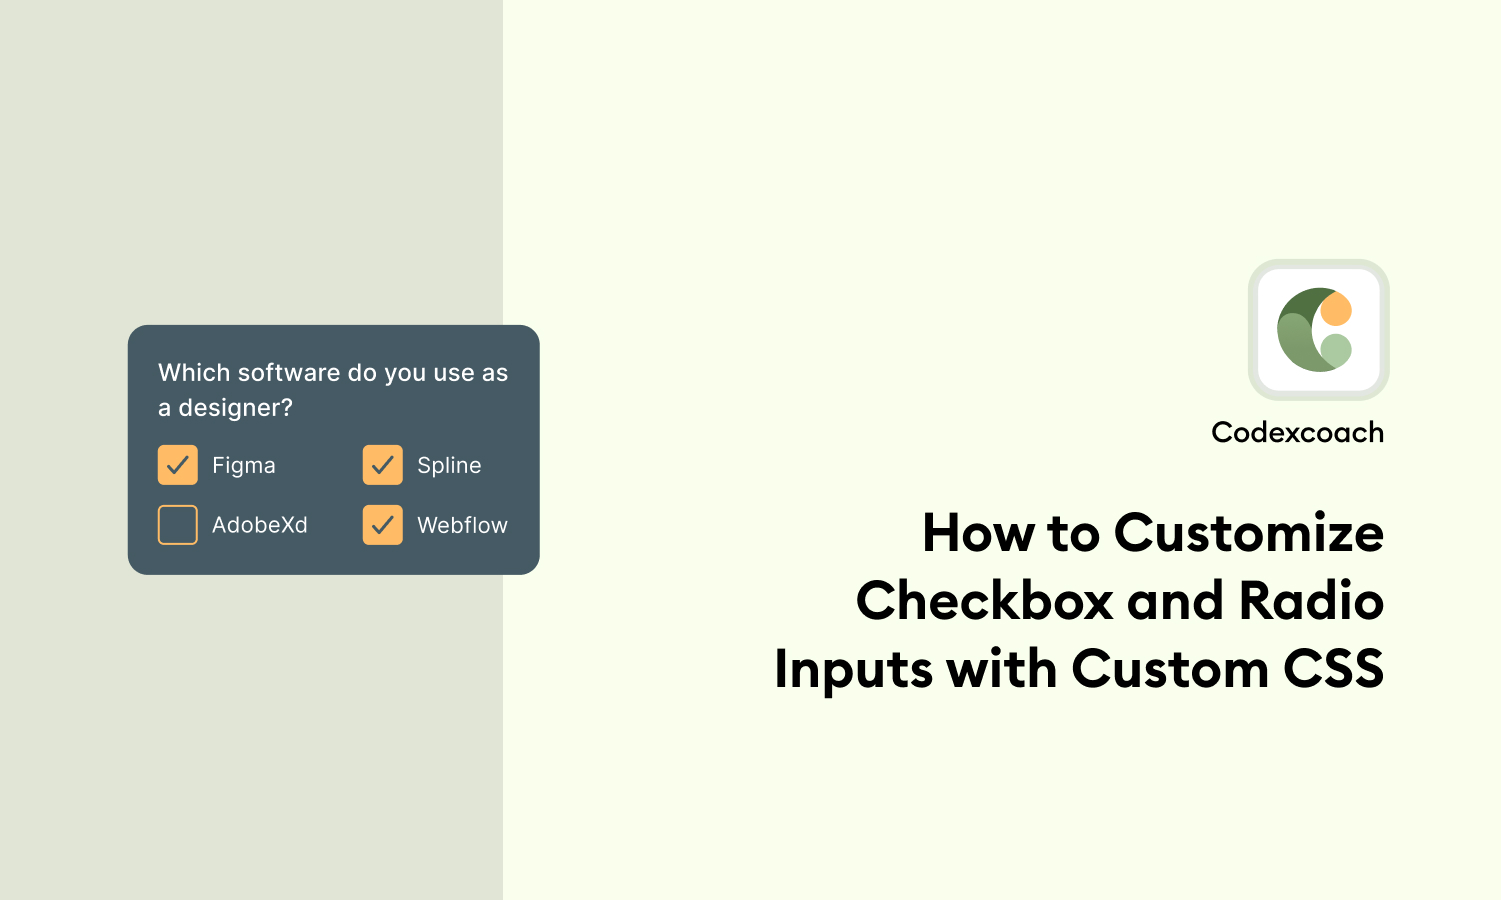 How to Customize Checkbox and Radio Inputs with Custom CSS